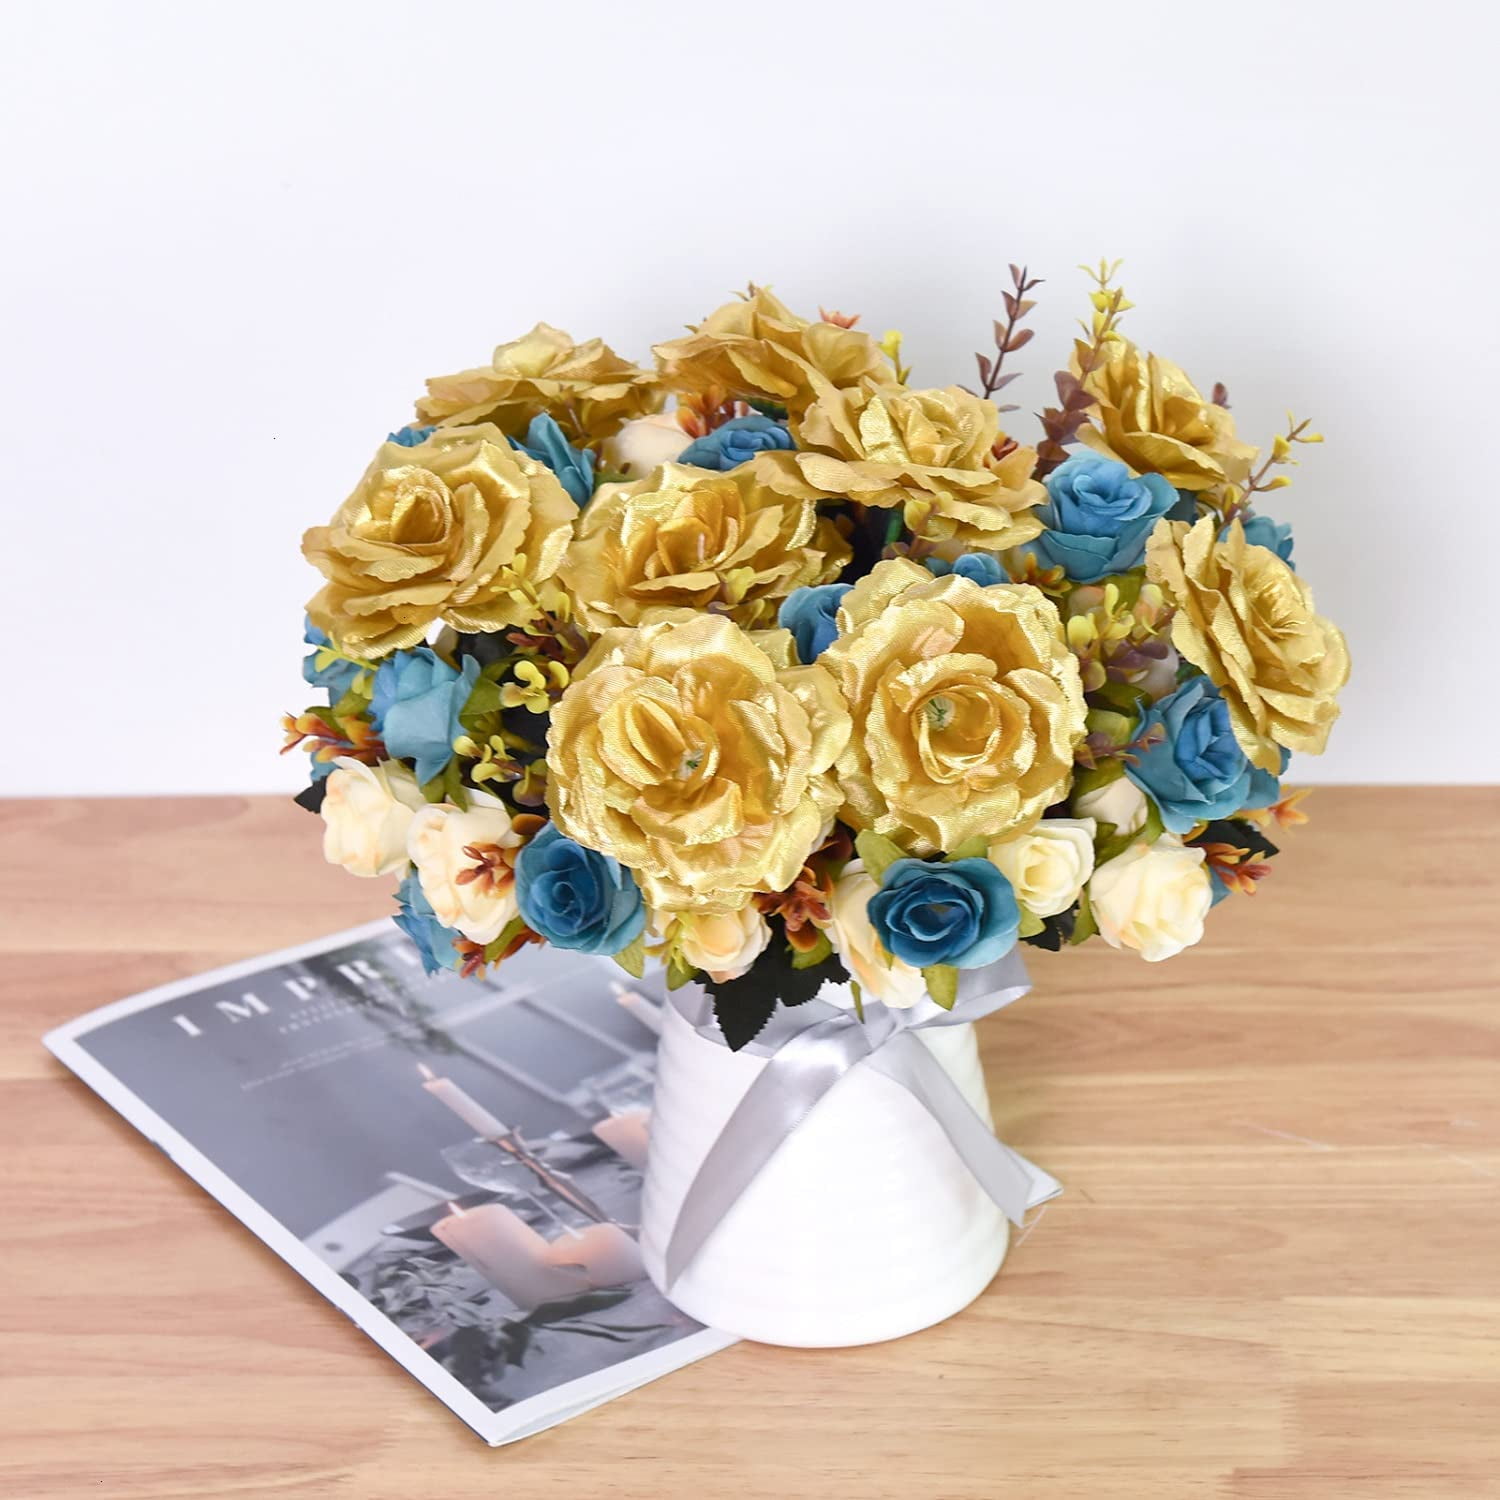 12 PCS Artificial Flowers Gold Roses Fake Silk Flower Long Stem Artificial  Roses for Home Wendding Bathroom Party Decorations (Gold)